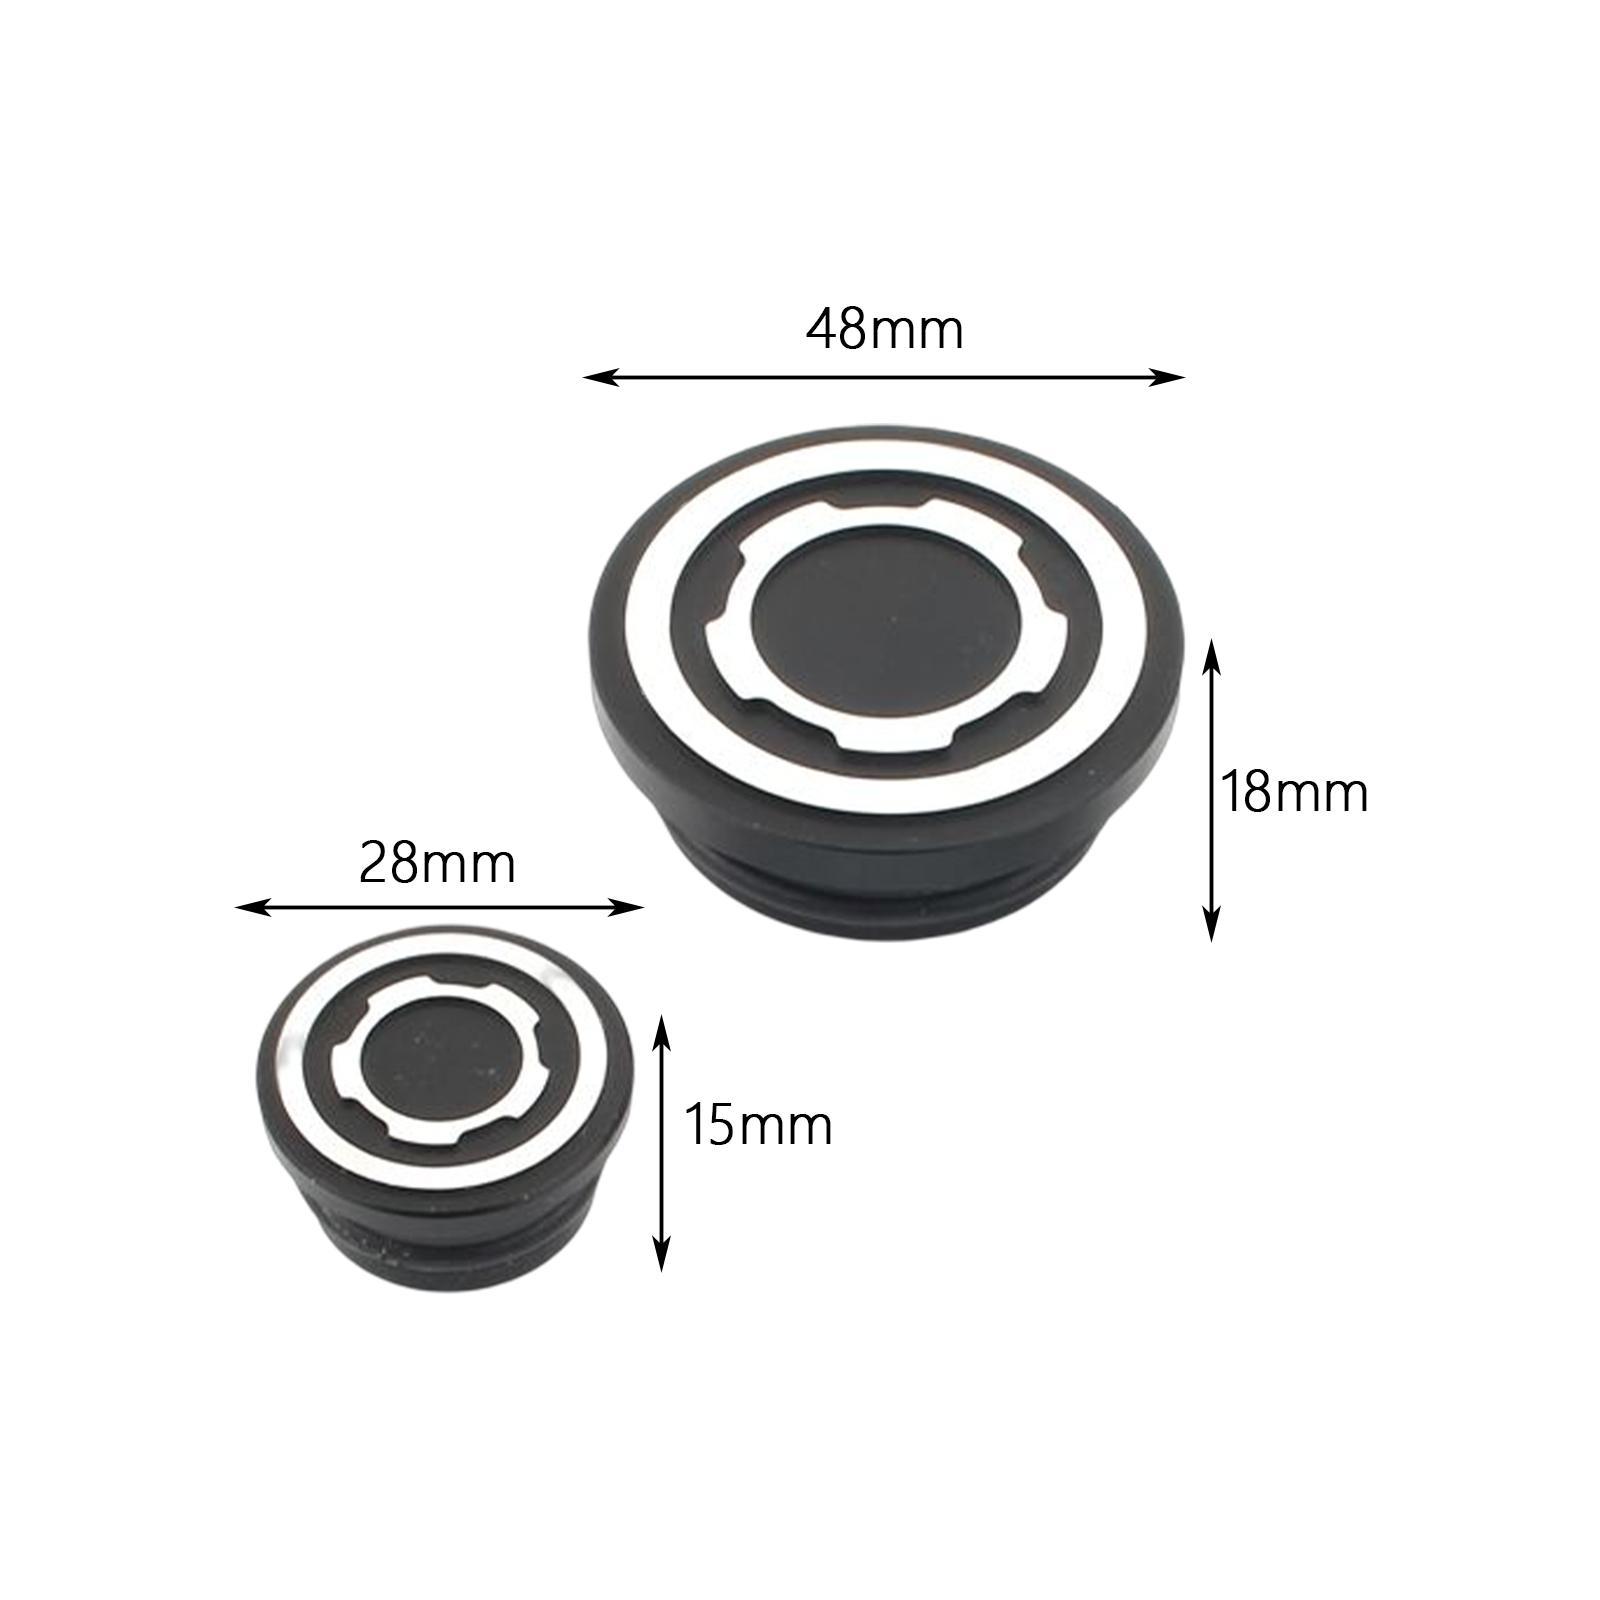 4x Motorbike Frame Hole Cover for  800 1100 Accessories